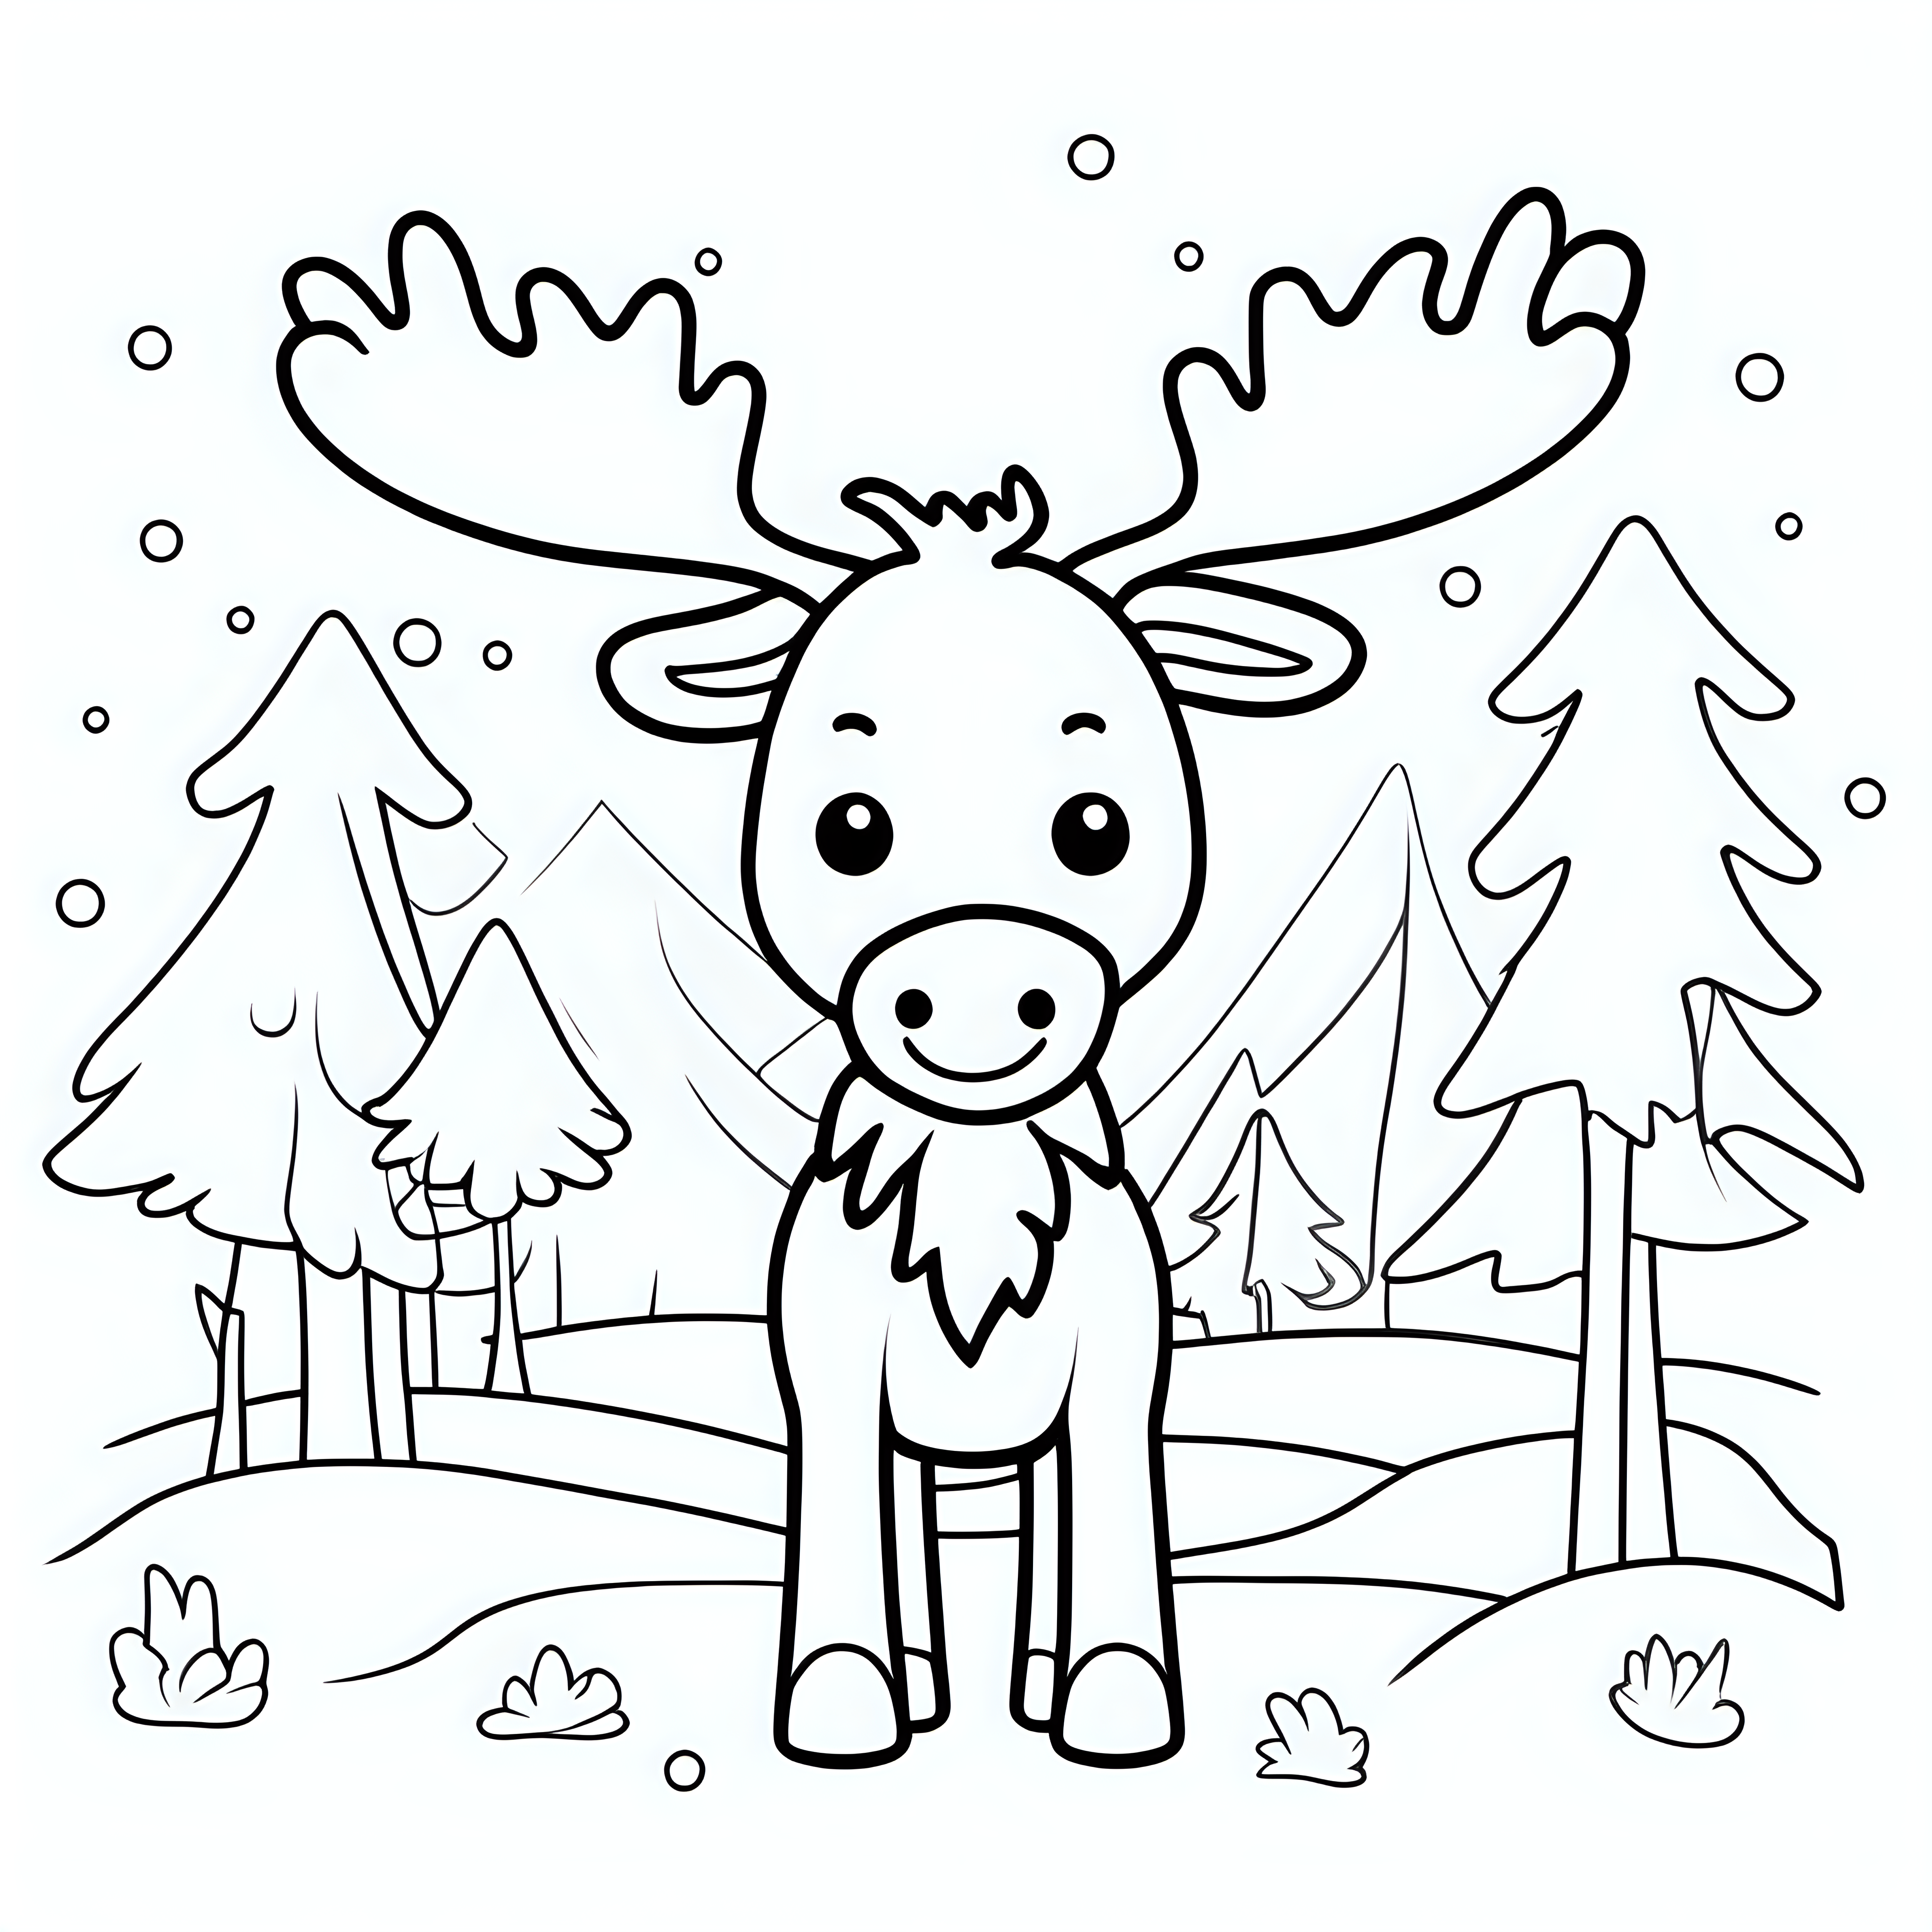 draw a cute Moose with only the outline